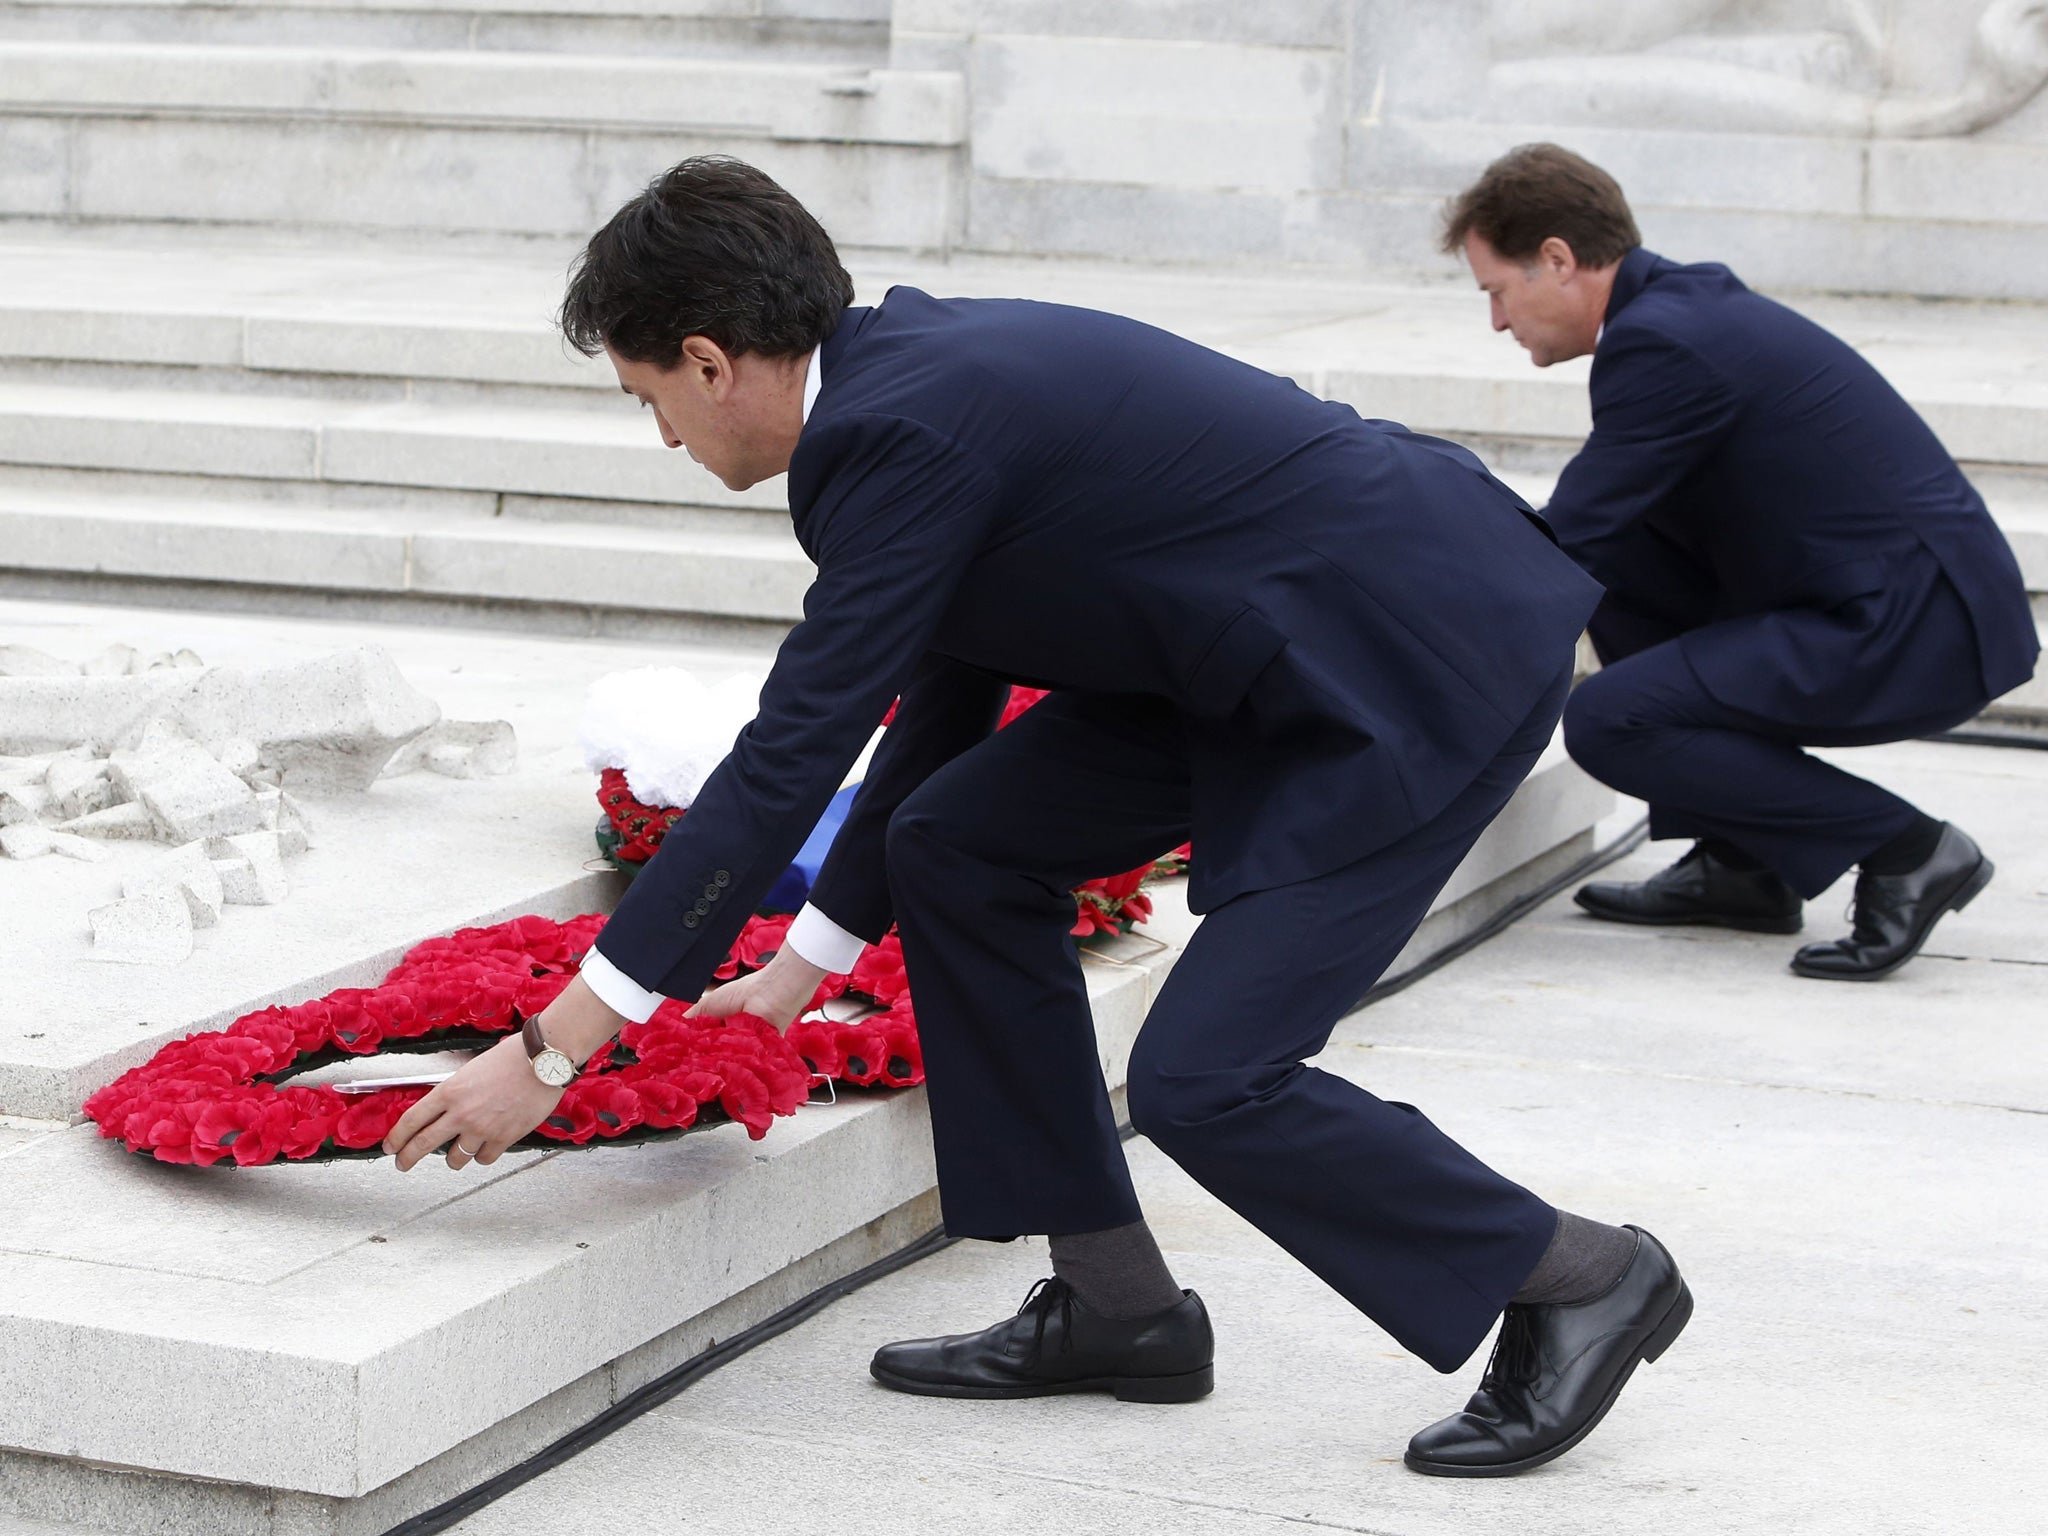 Ed Miliband and Nick Clegg lay their wreaths at the Cenotaph in Glasgow to commemorate the centenary of the start of the First World War (PA)